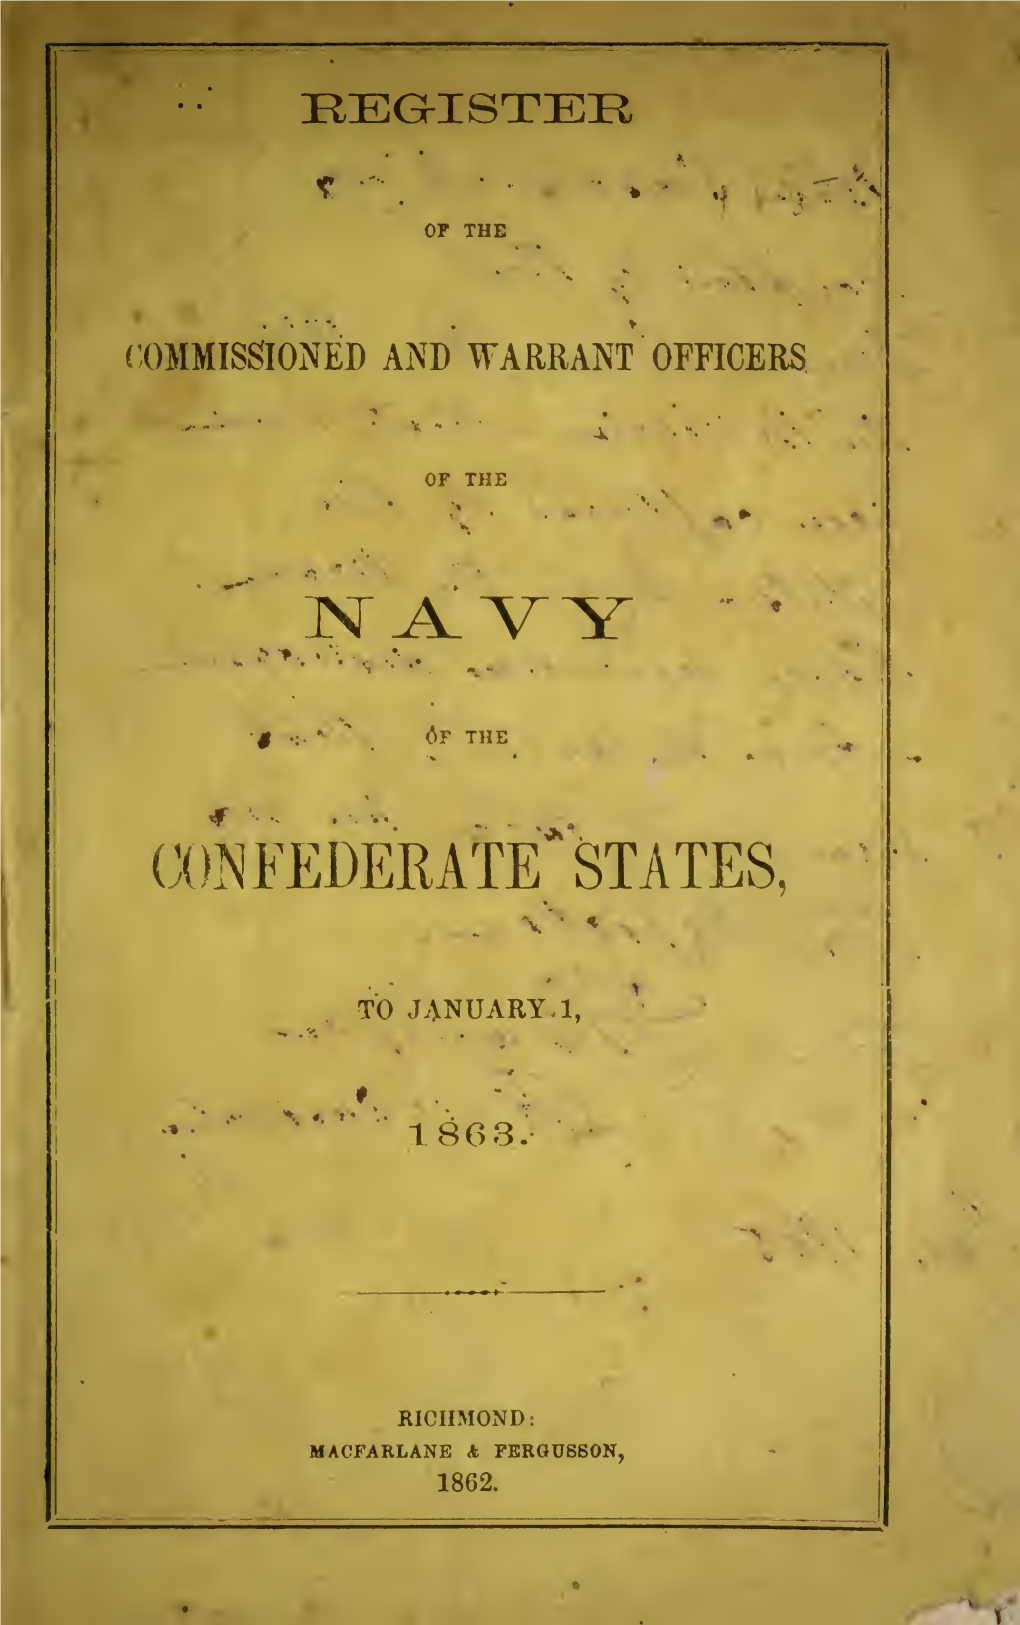 Register of the Commissioned and Warrant Officers of the Navy of the Confederate States, to January 1, 1863